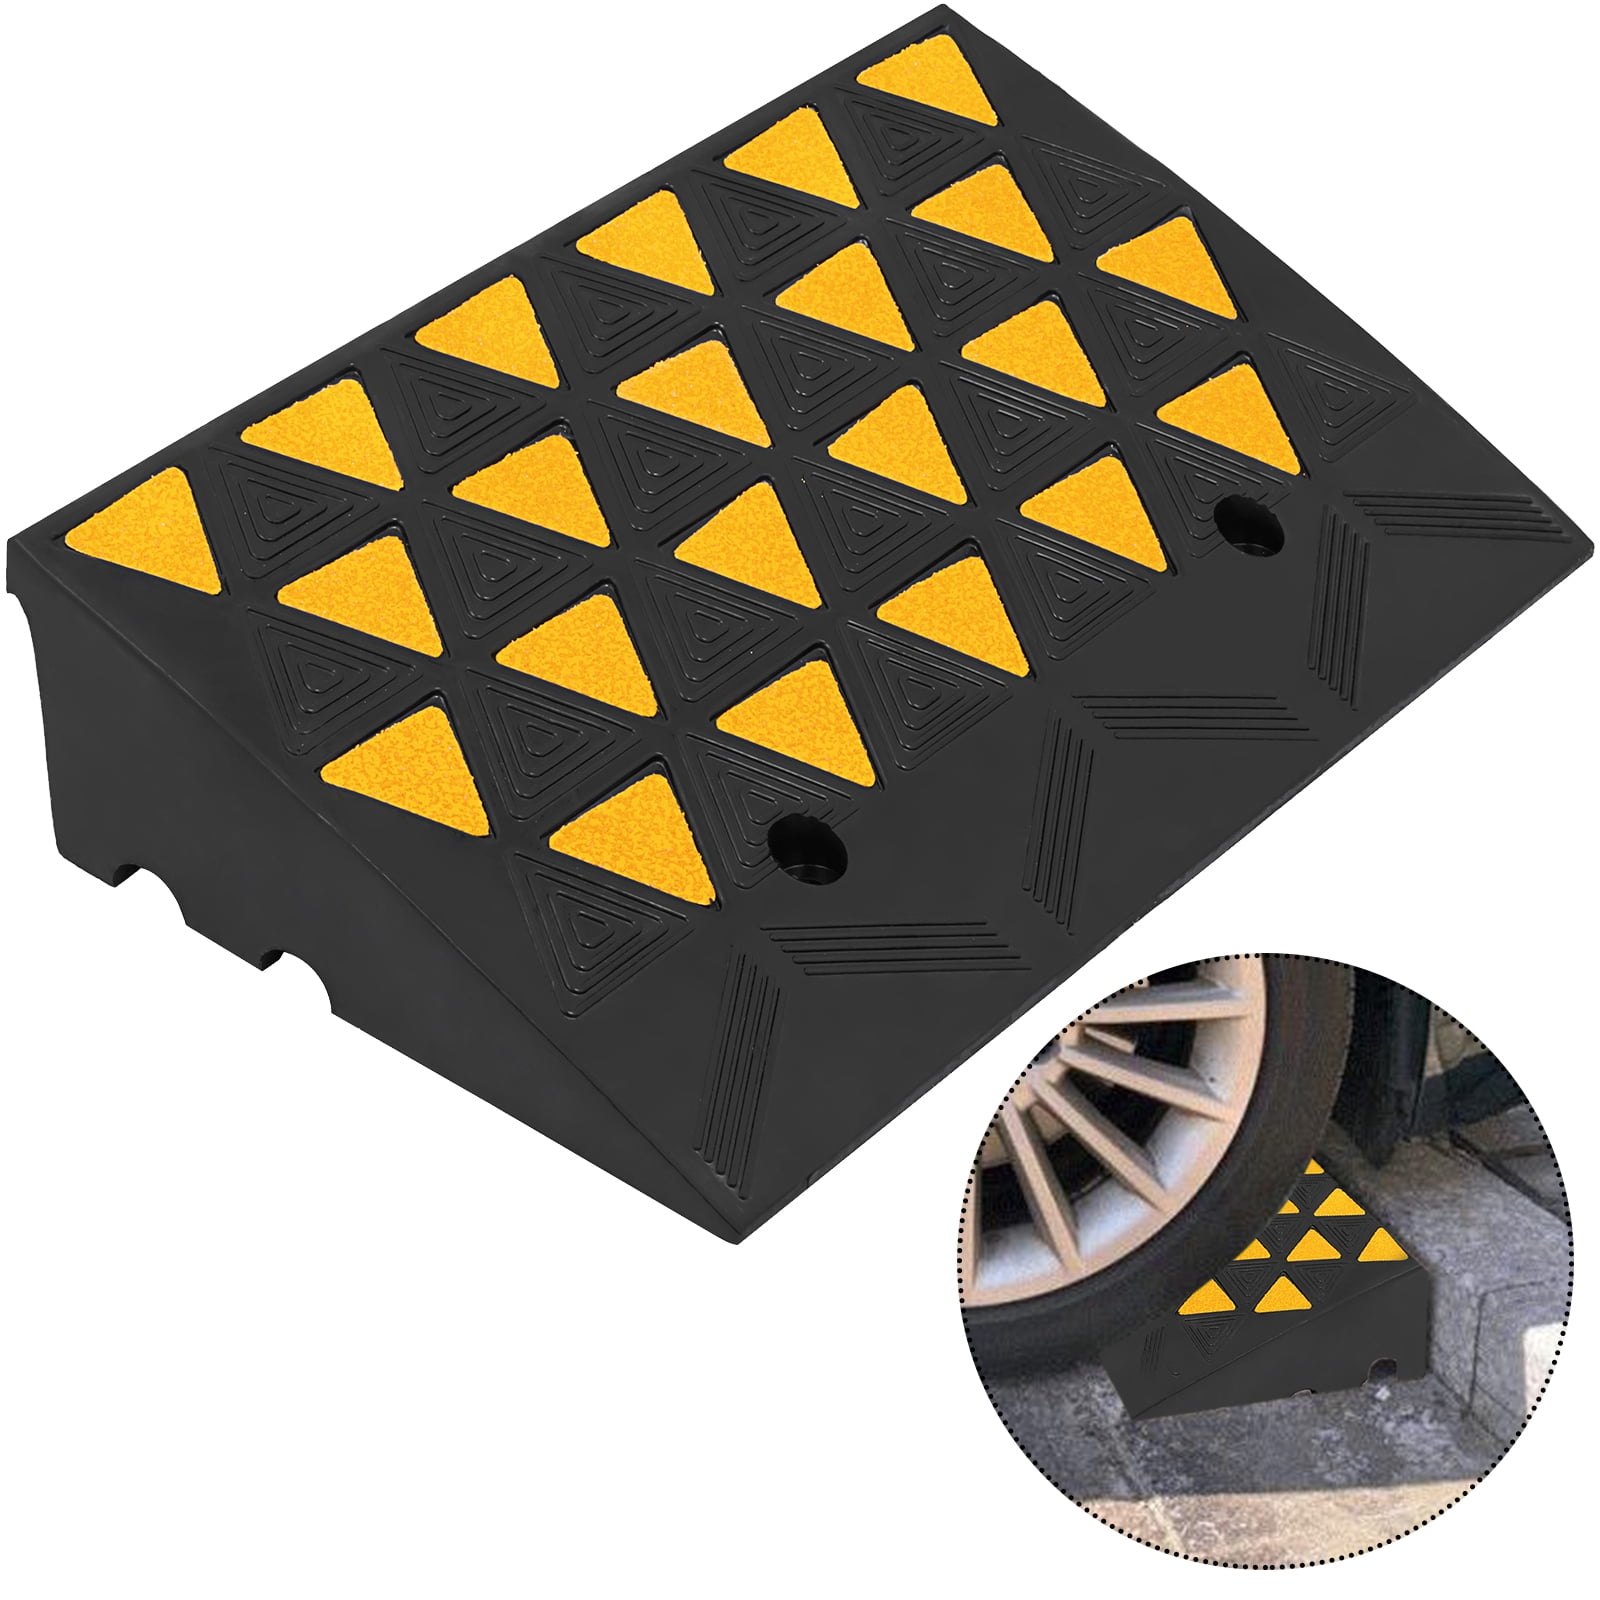 Color : Black, Size : 100256CM 11 way bike CSQ-Ramps 4-11CM Multiple Heights Vehicle Ramps Parking Lot Entrance Curb Ramps Sturdy Durable Truck Ramps Home Use Step Mat Kerb Ramps 